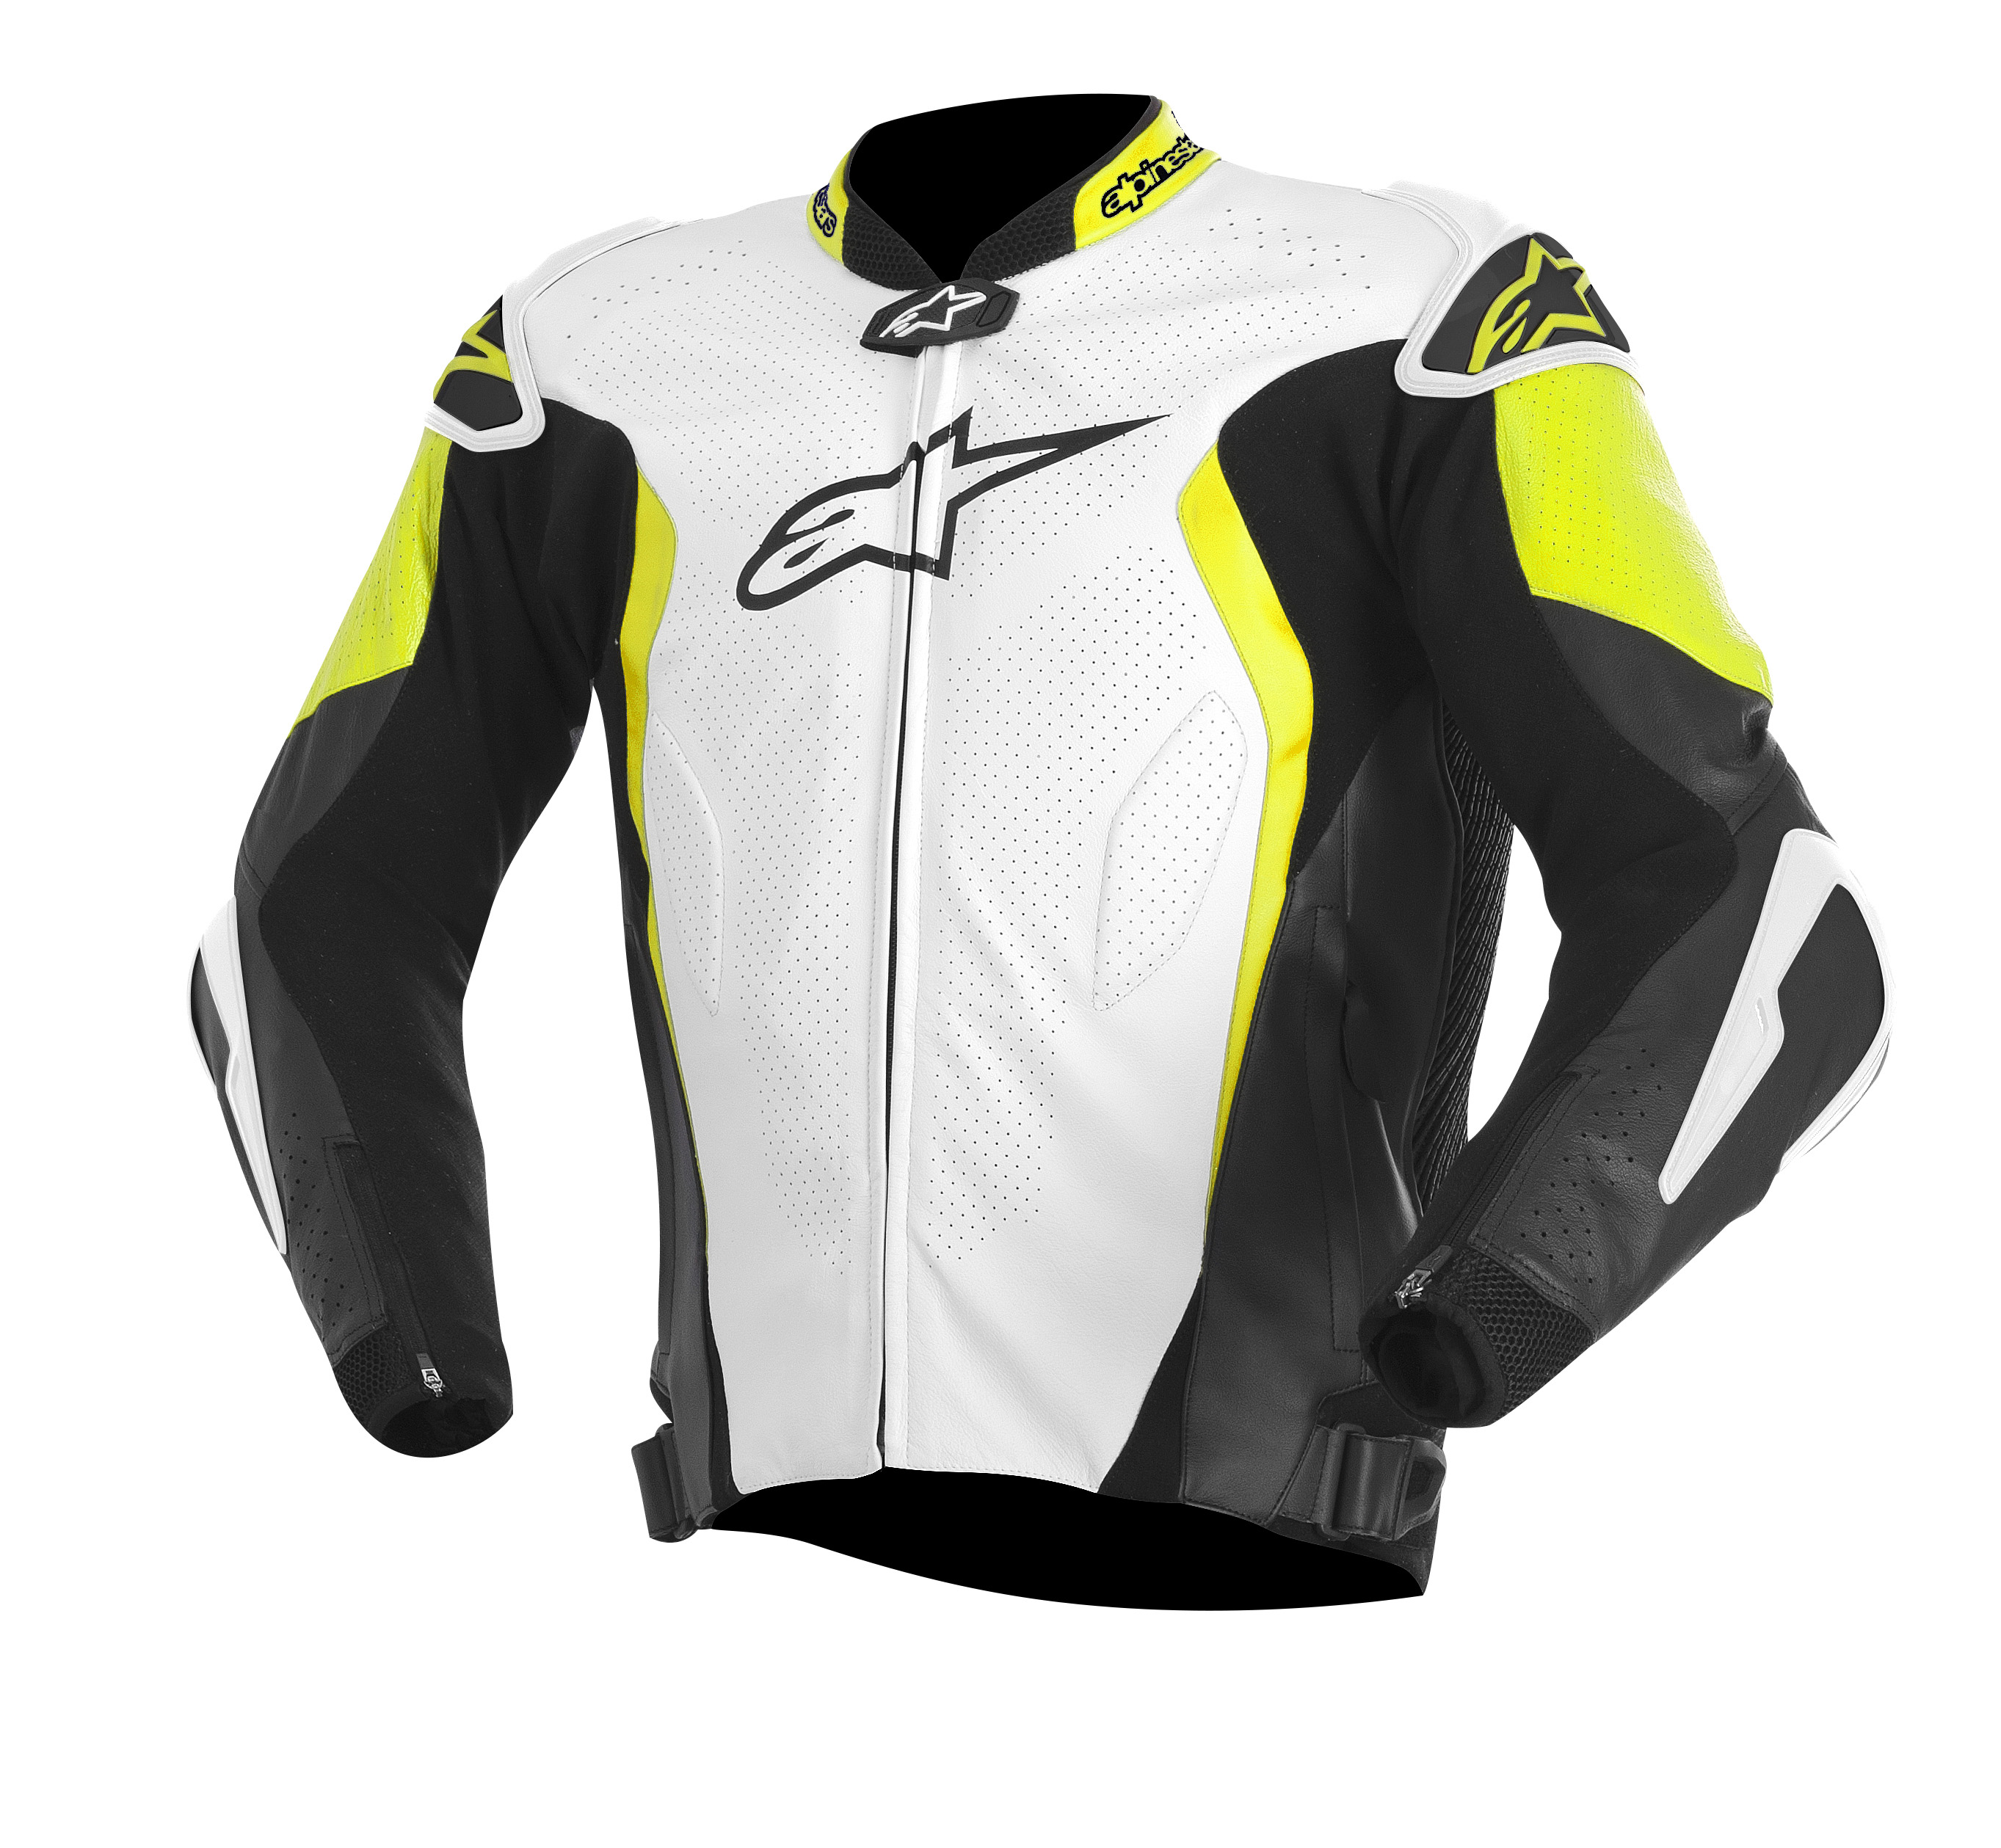 Alpinestars launches 2014 spring collection